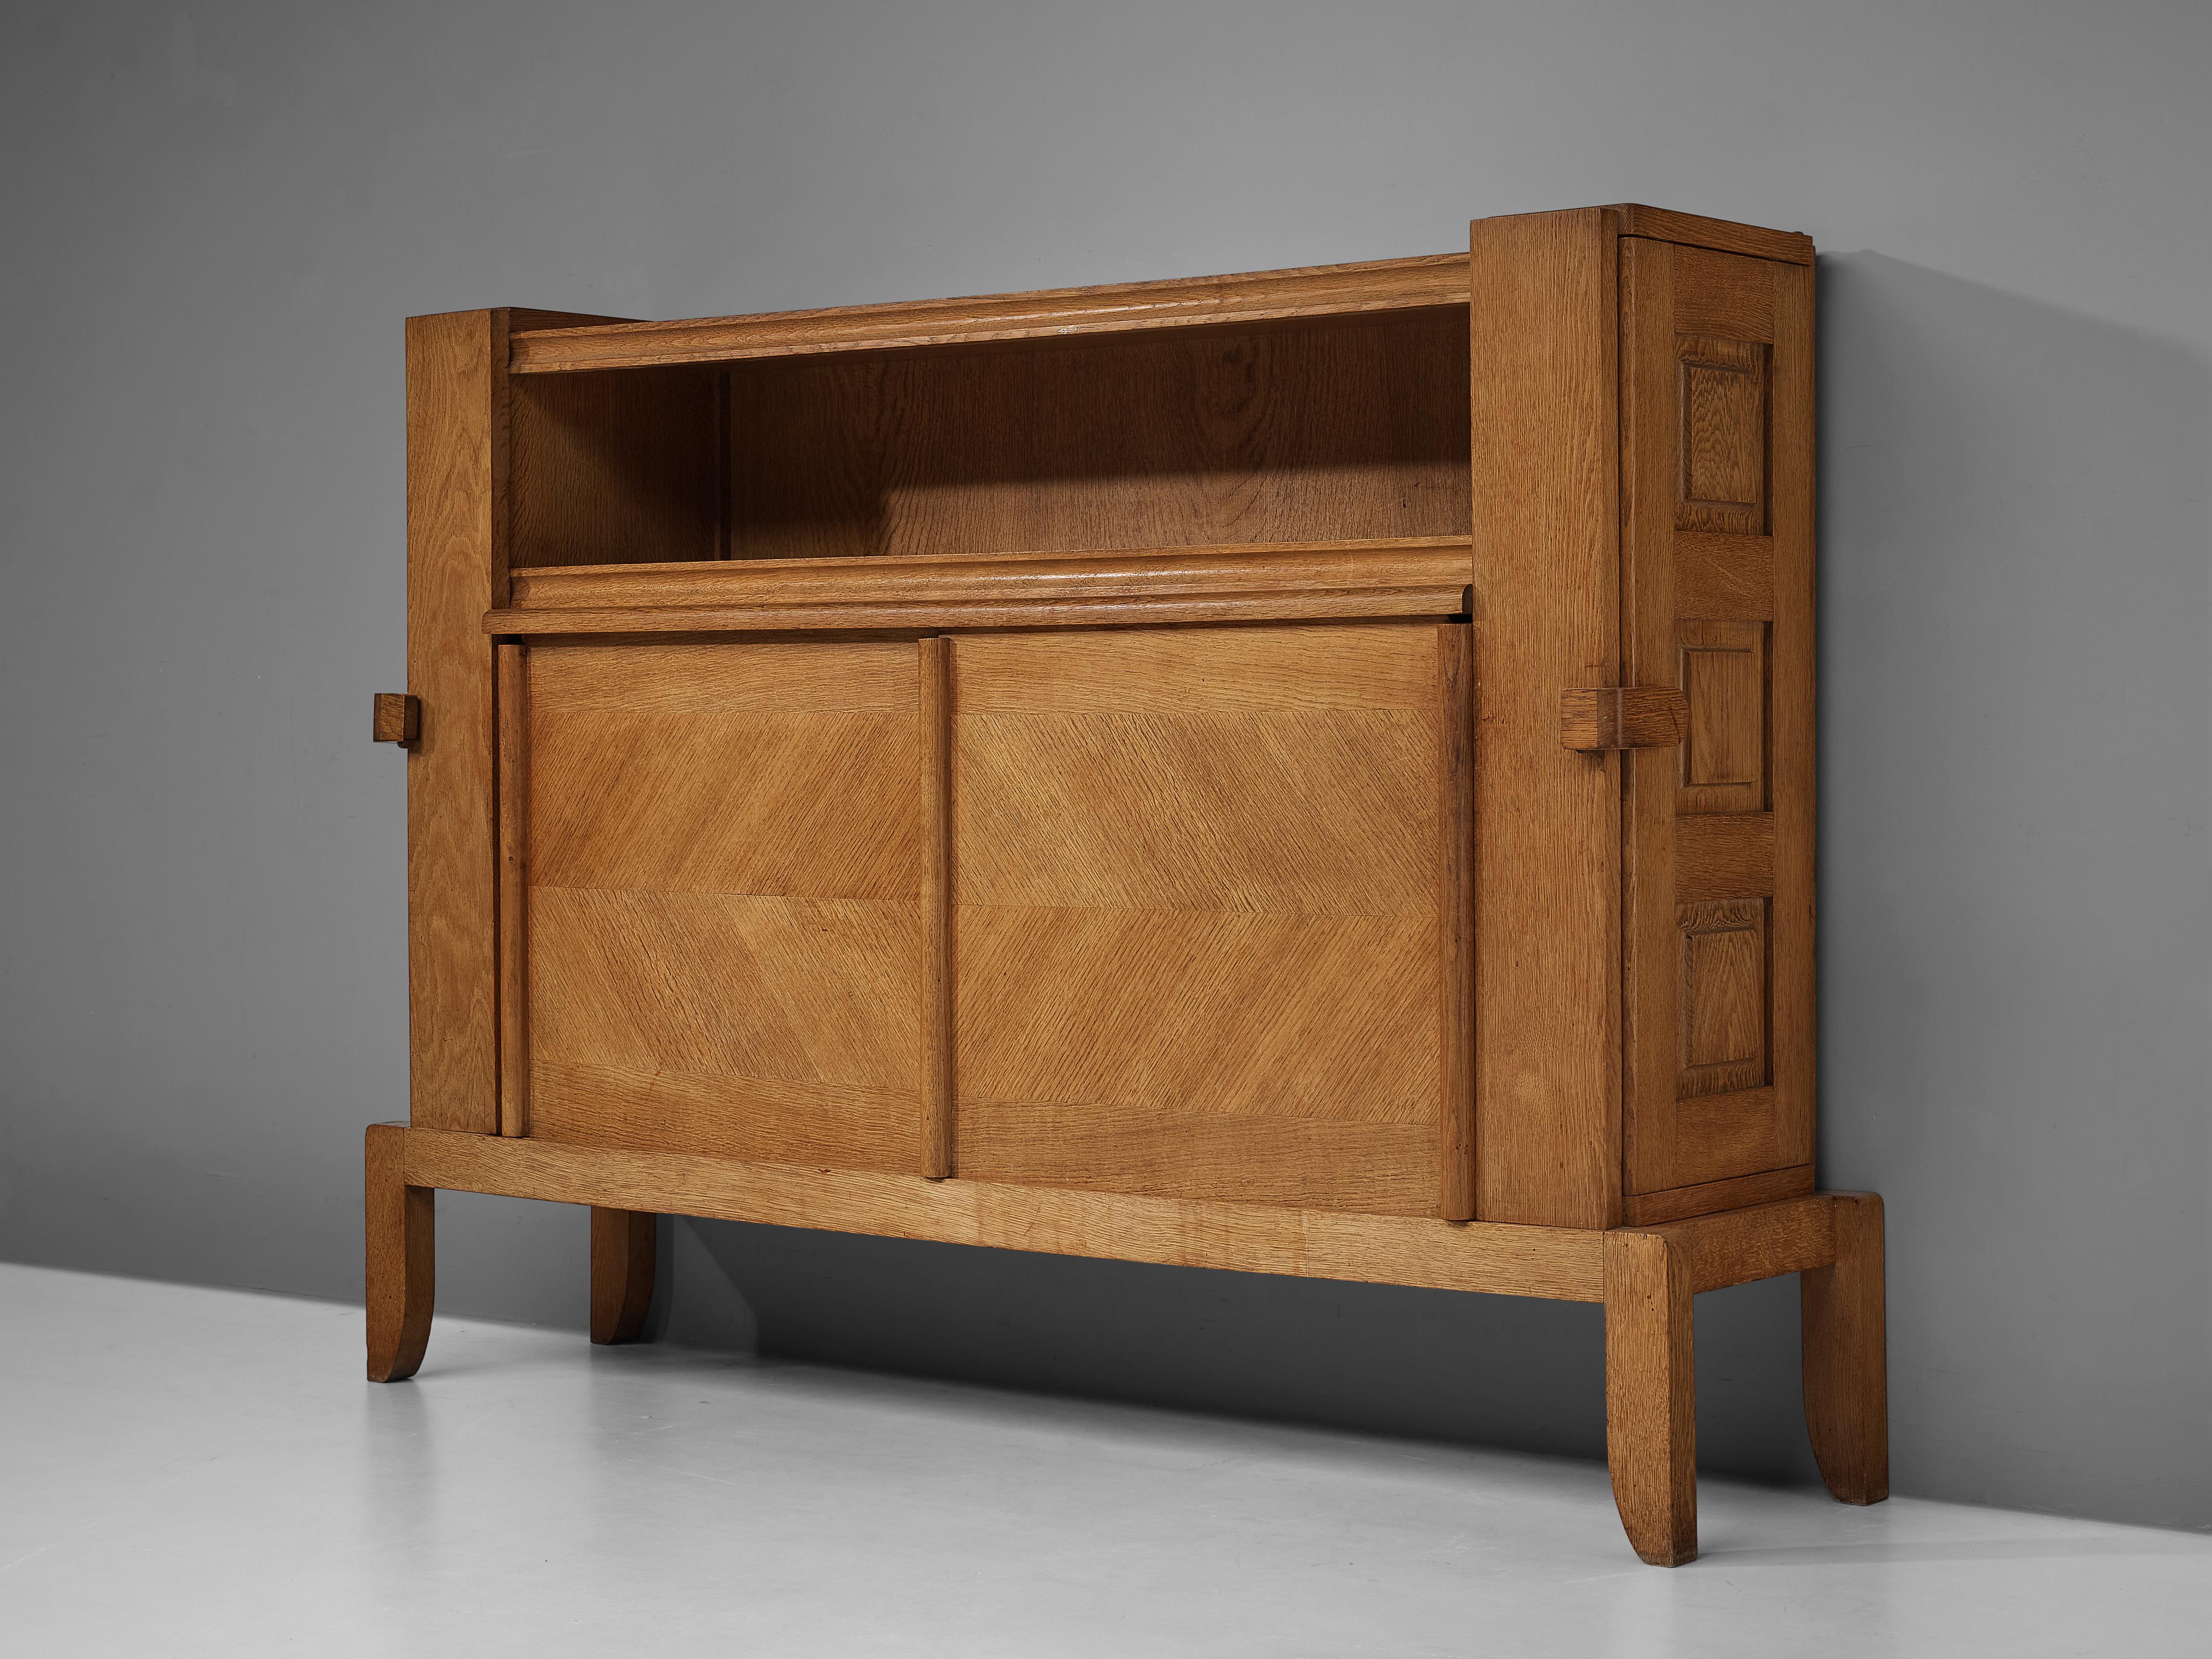 Guillerme et Chambron for Votre Maison, cabinet, oak, France, 1970s.

This case piece is designed by Guillerme et Chambron and features a decorative design in the doors and legs. The cabinet offers plenty of storage, with several shelves and